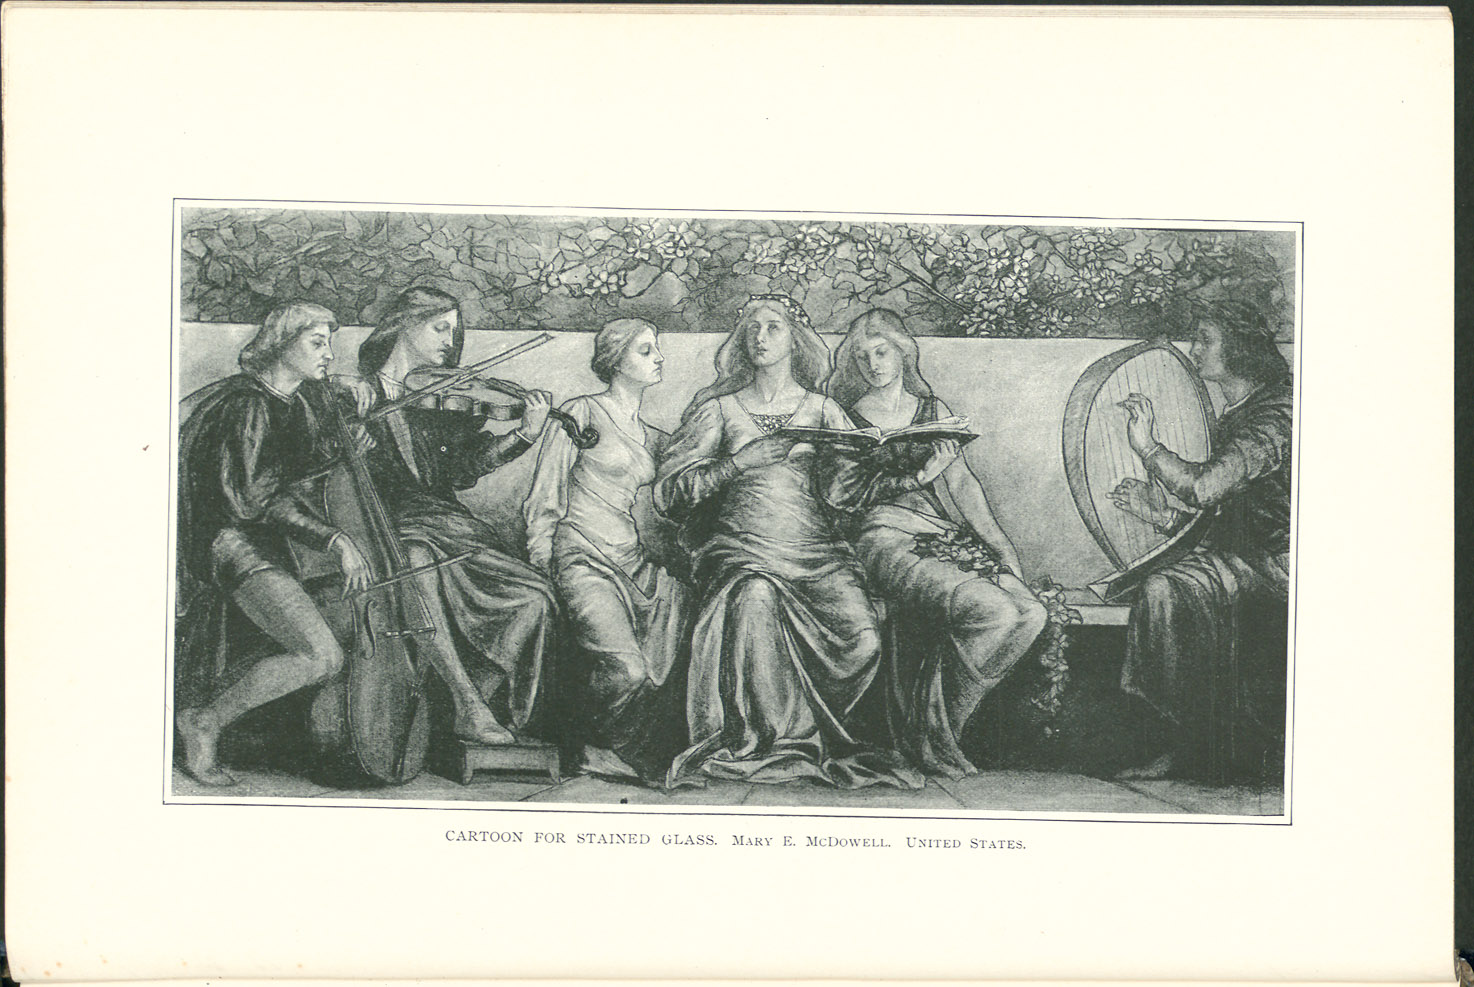 troupe of musicians, three men and women play harp, violin, and cello and three women sing